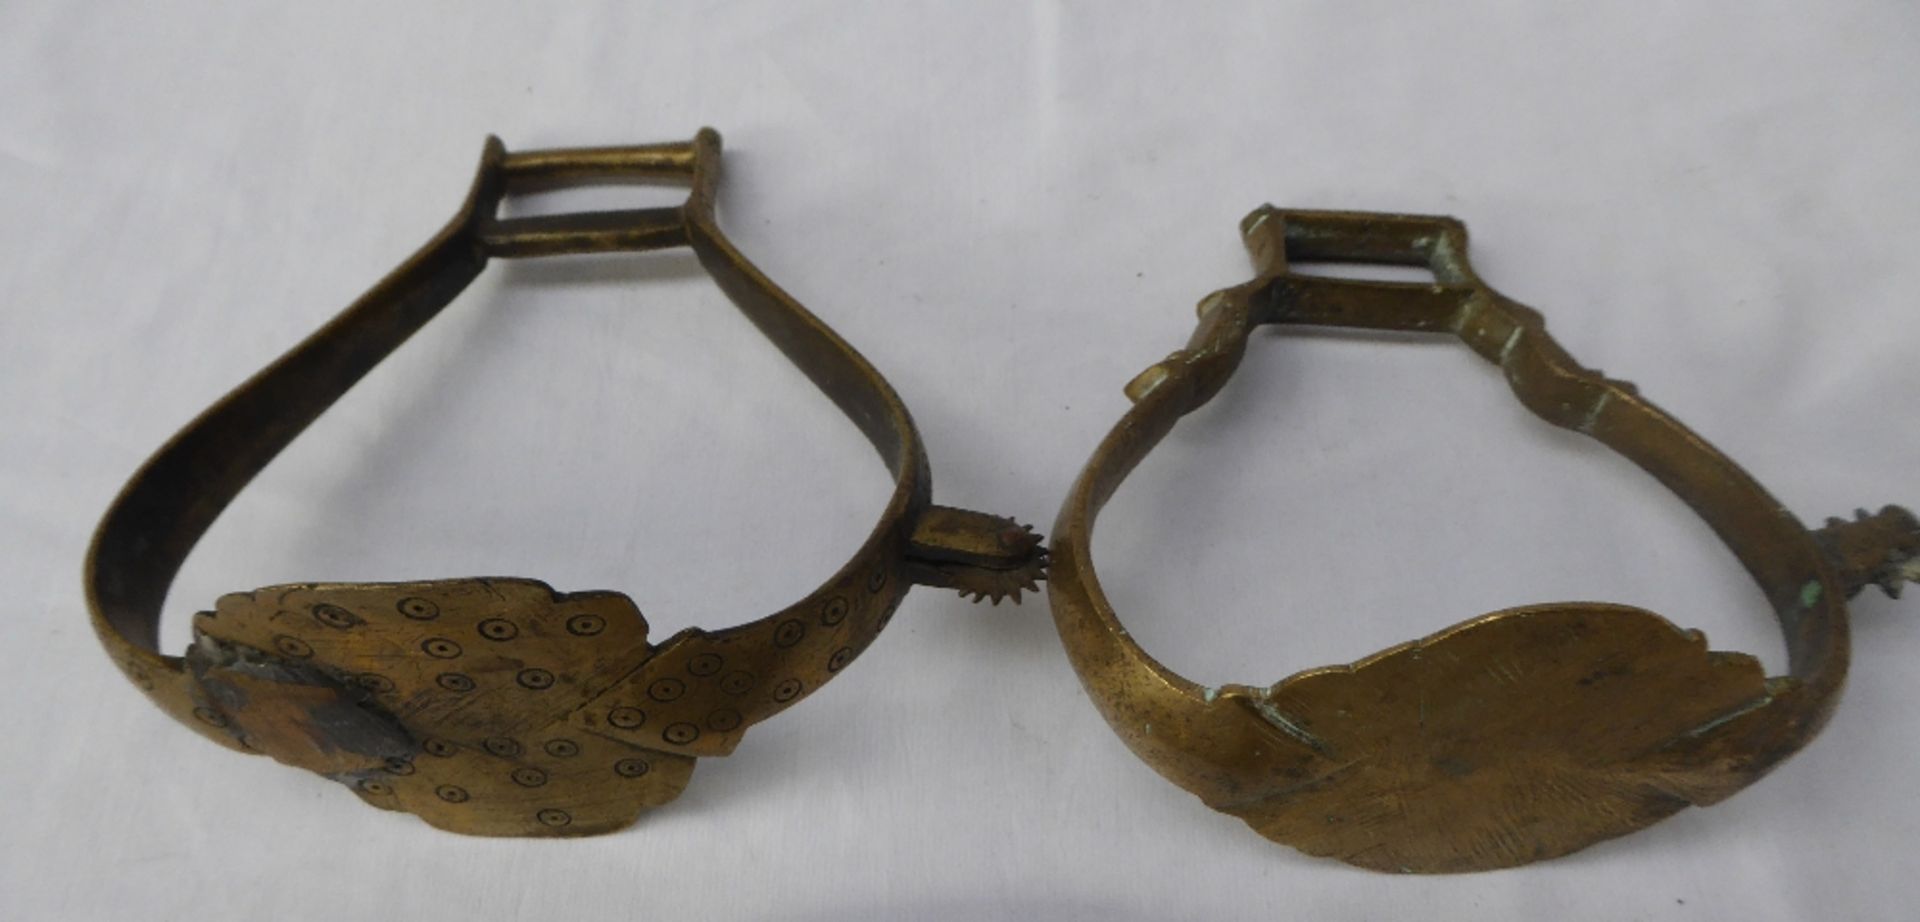 2 South American stirrups with rowelled spurs incorporated in the sides.